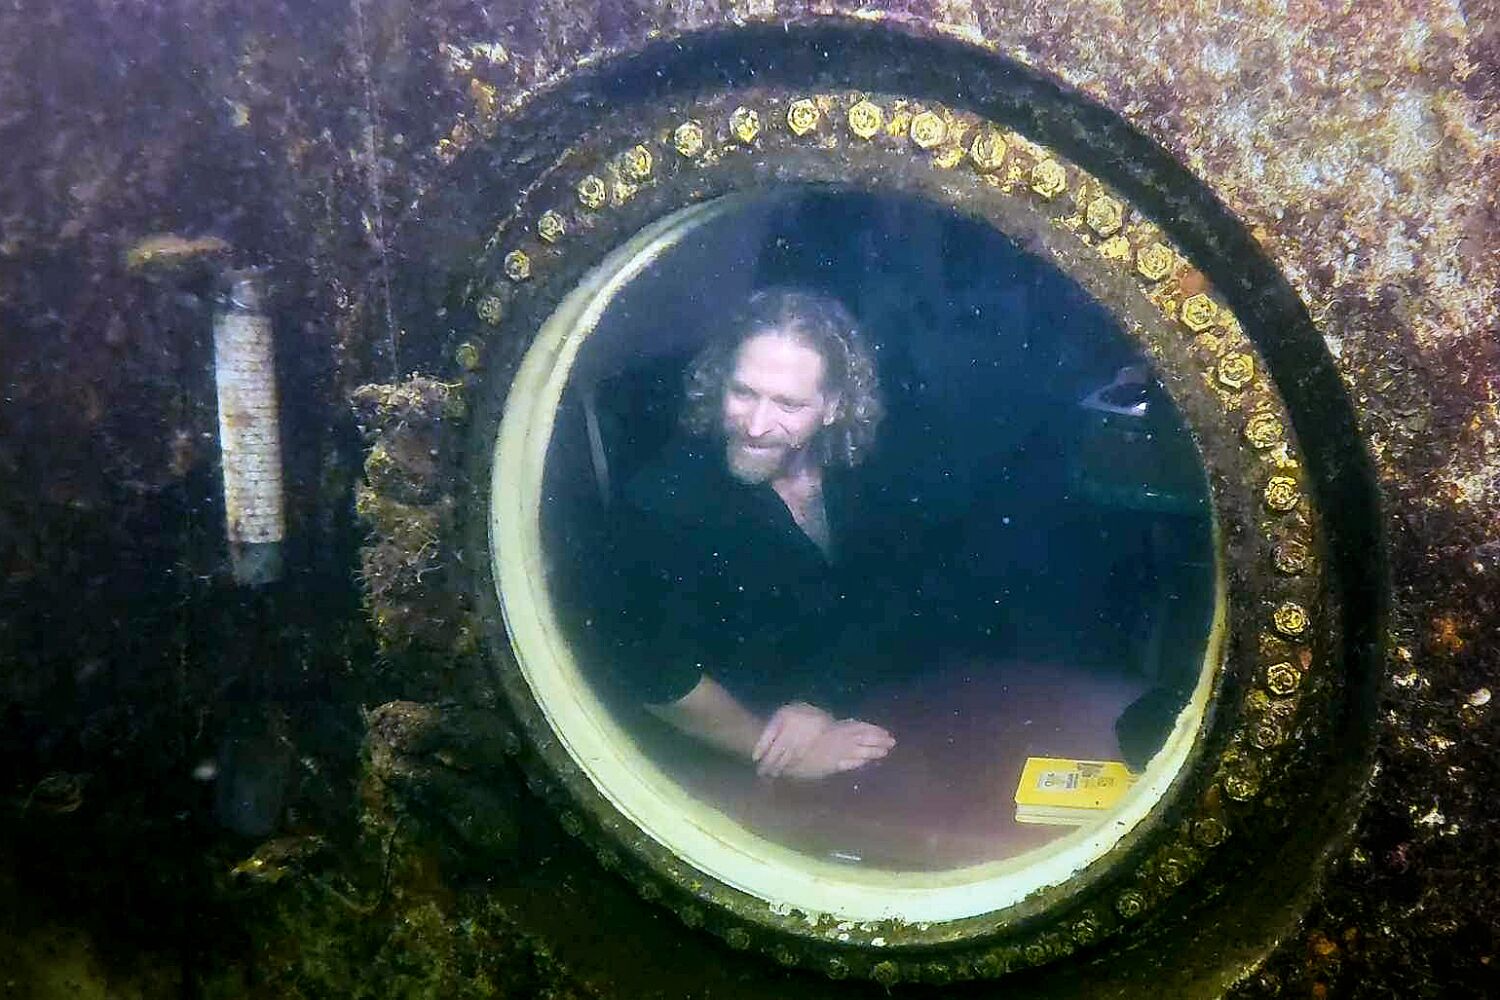 Florida professor lives in an underwater hotel for a record 73 days. His goal? An even 100